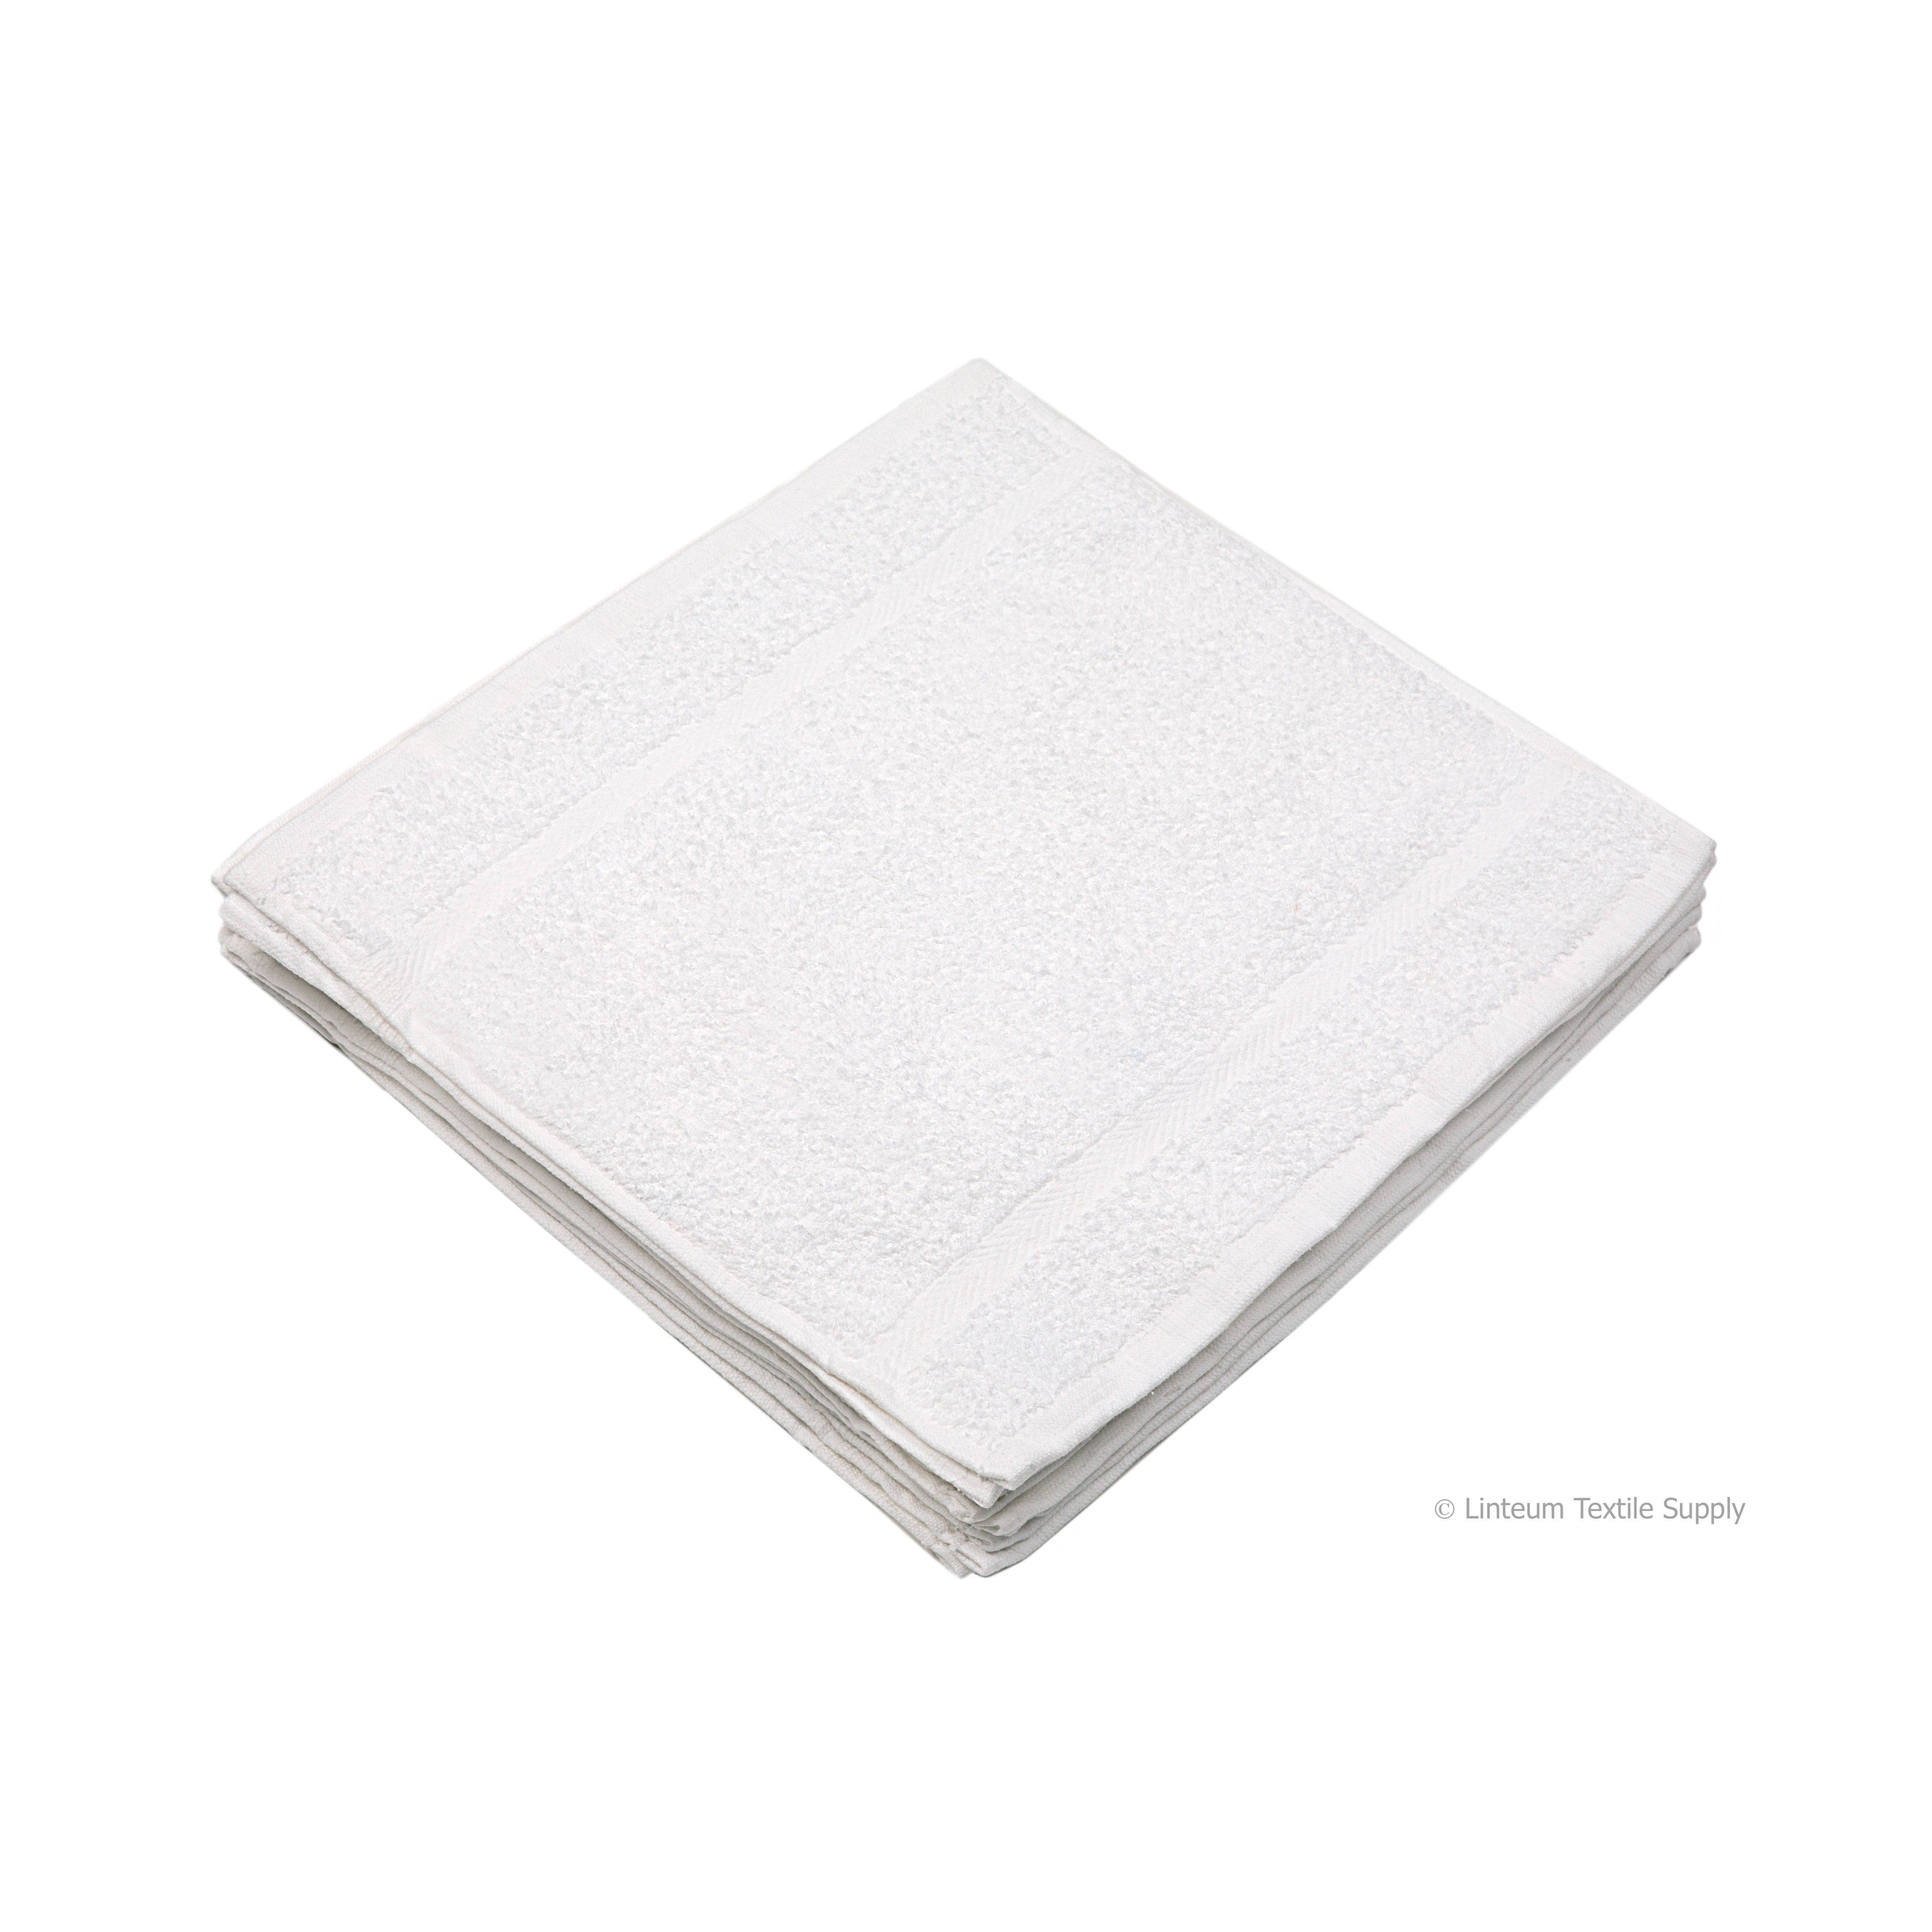 Linteum Textile 12 Pack 12x12 In White Washcloths Face Towels 100